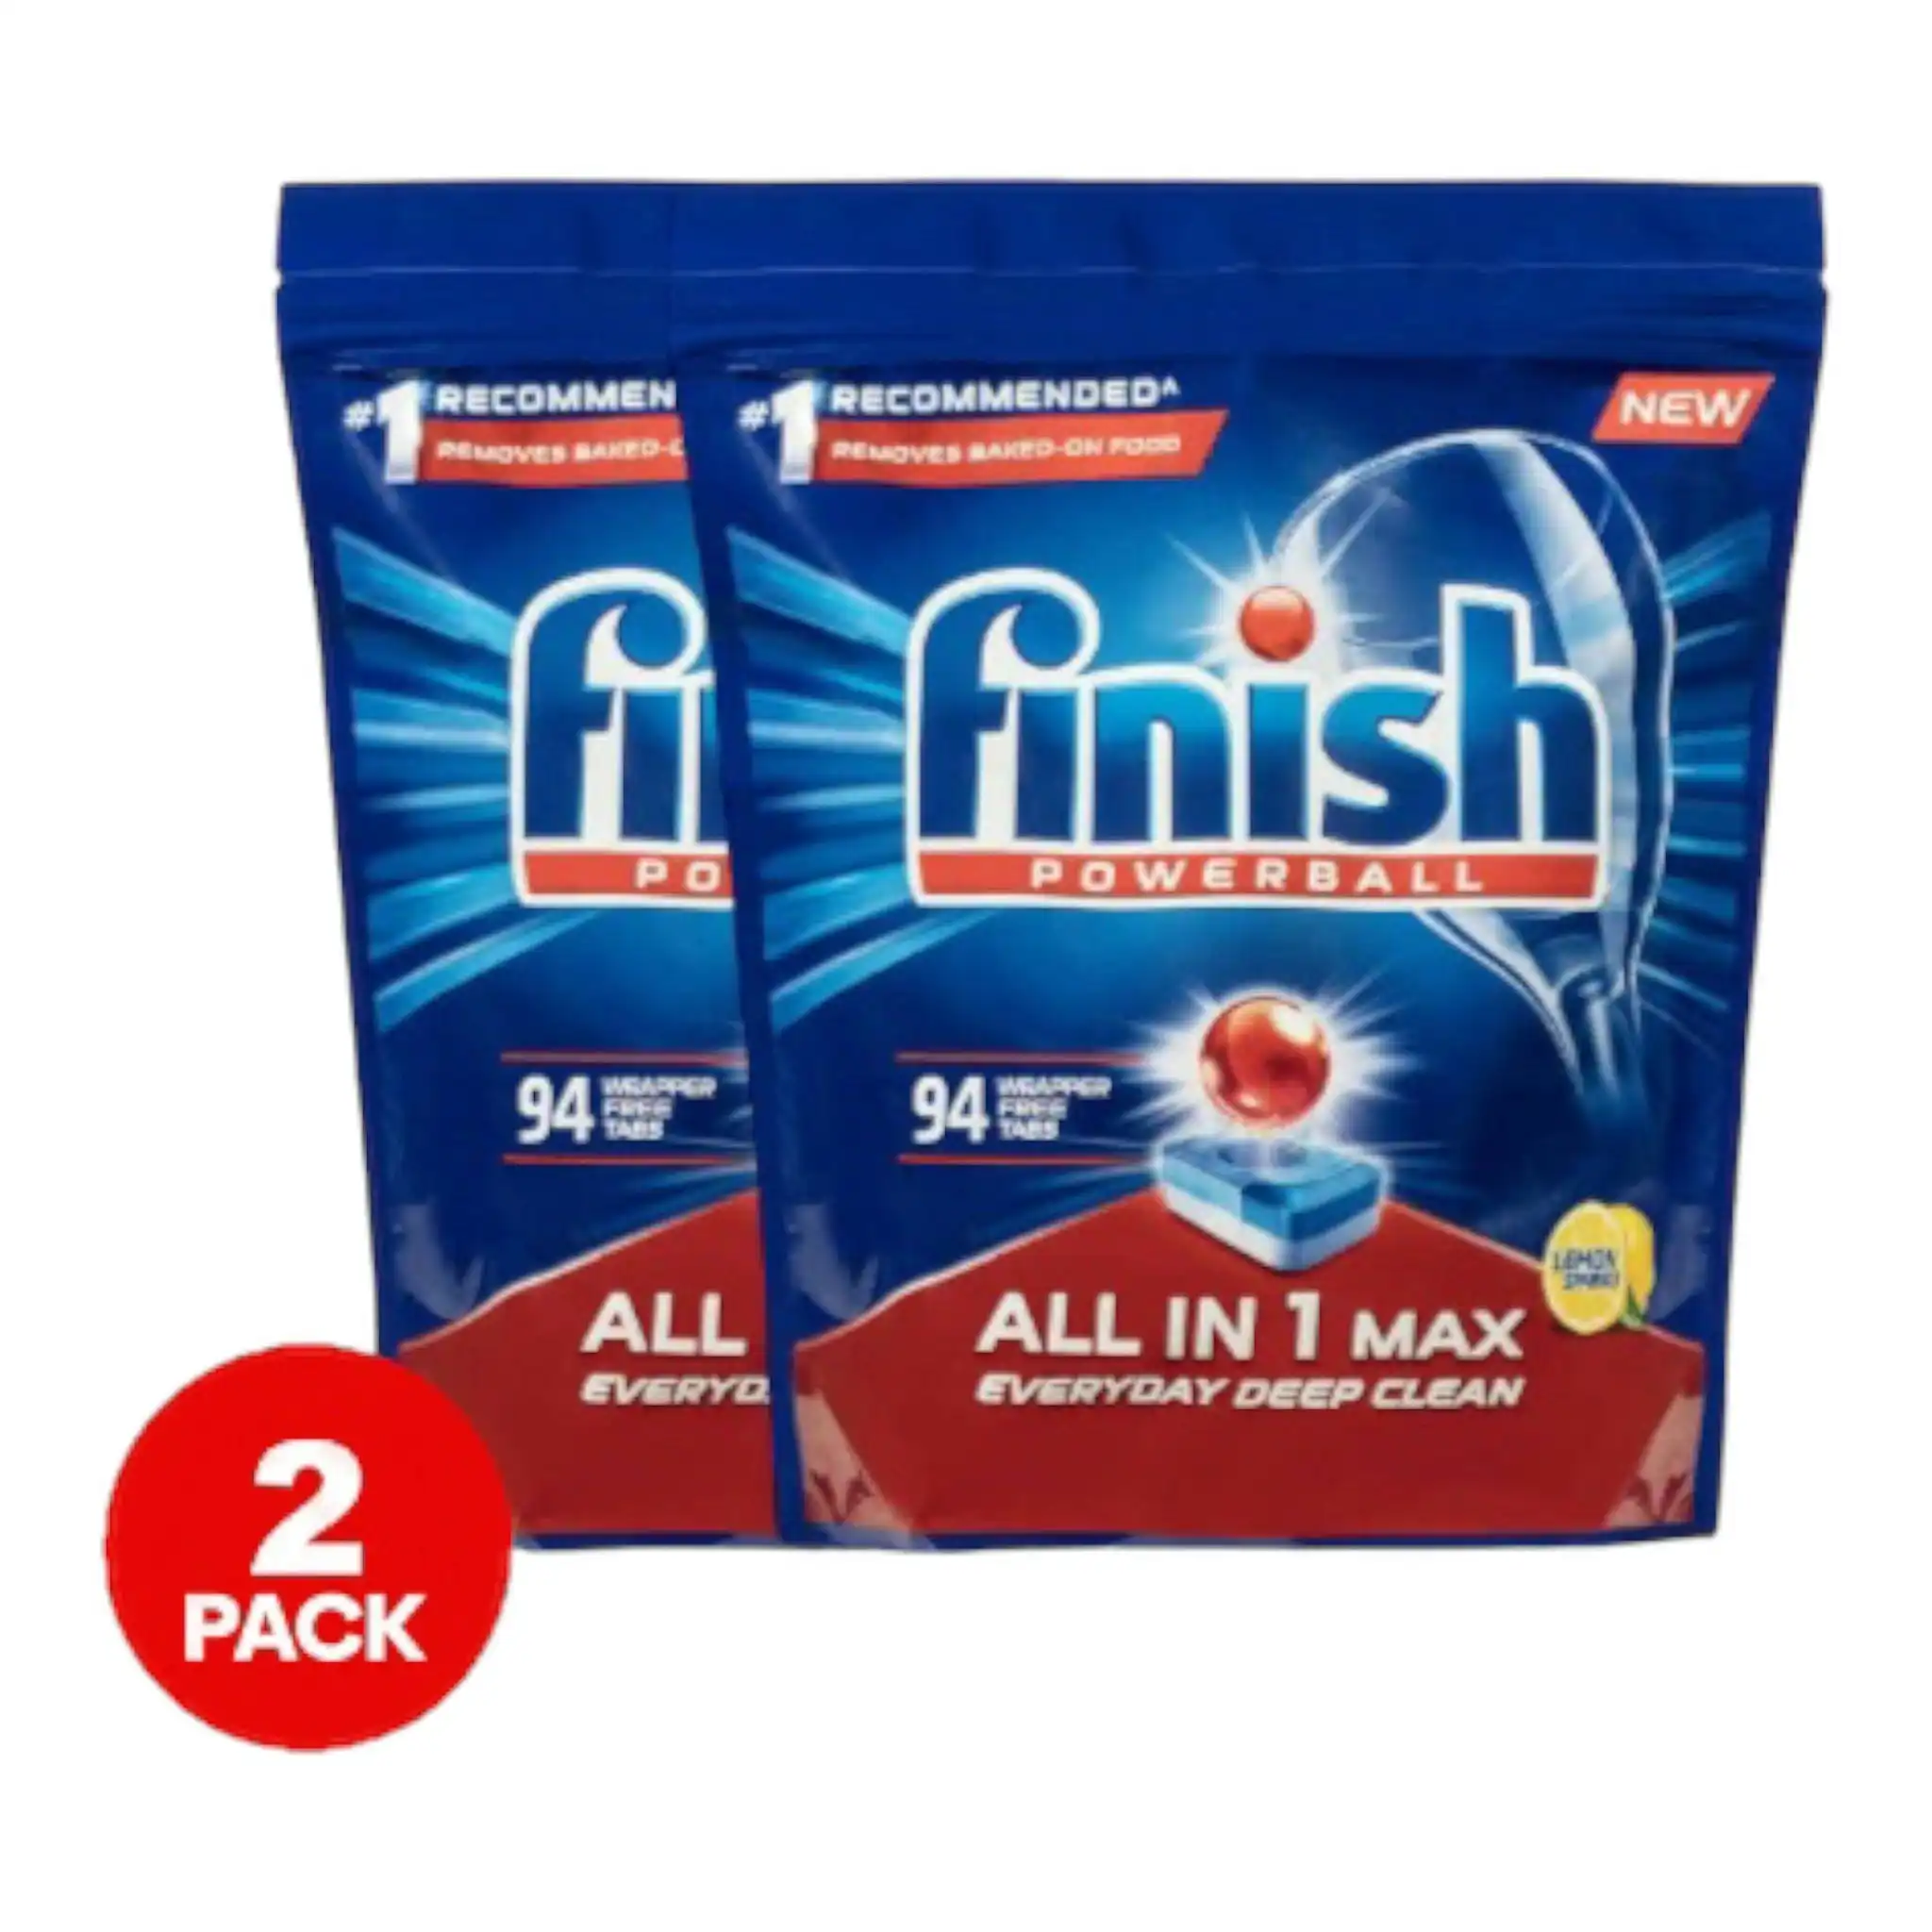 2 Pack Finish Powerball All-in-1 Max Dishwashing Tablets Lemon Sparkle 94